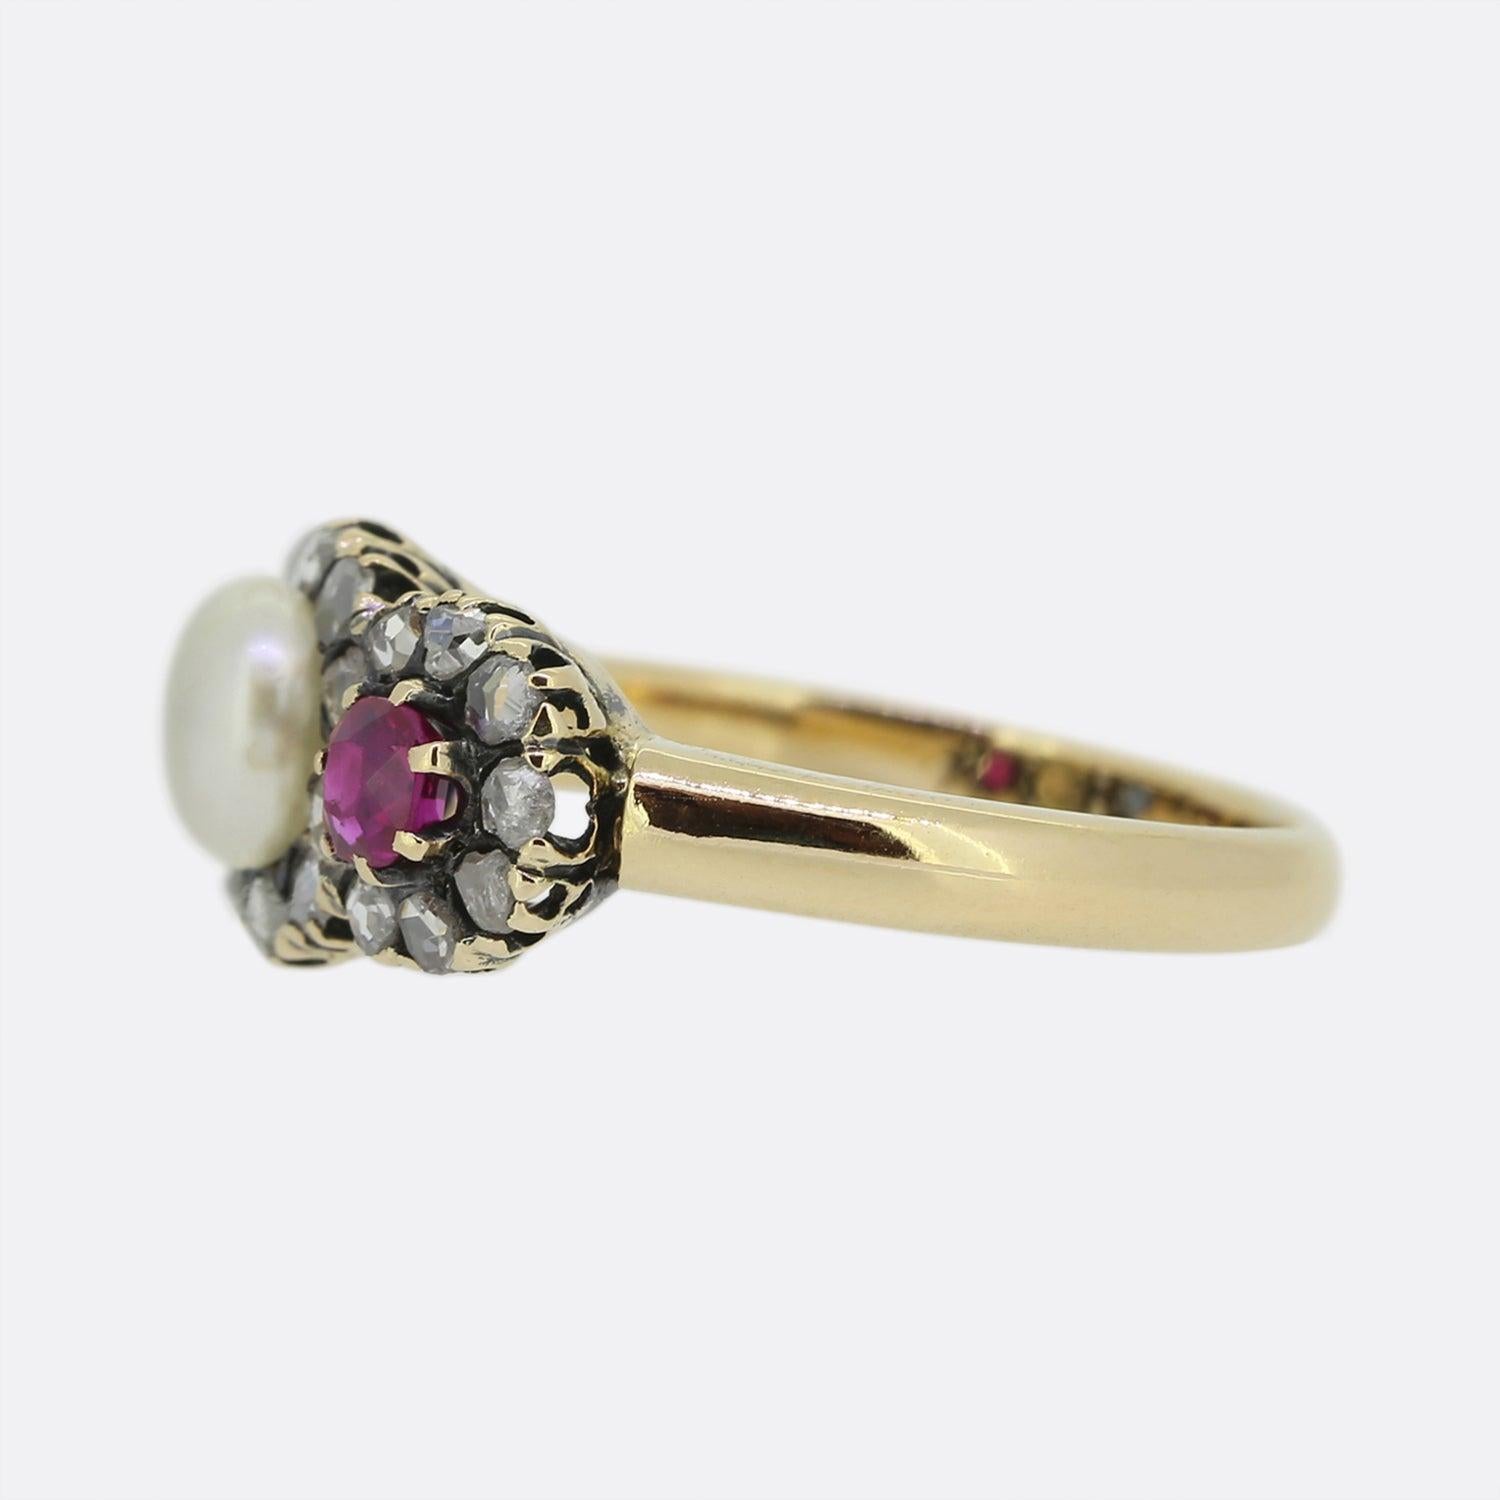 This is a wonderful 18ct yellow gold Victorian triple cluster ring. The centre of the ring is set with a button pearl with a lovely white lustre. On one side there is a ruby and the other a sapphire. Surrounding these three stones there are